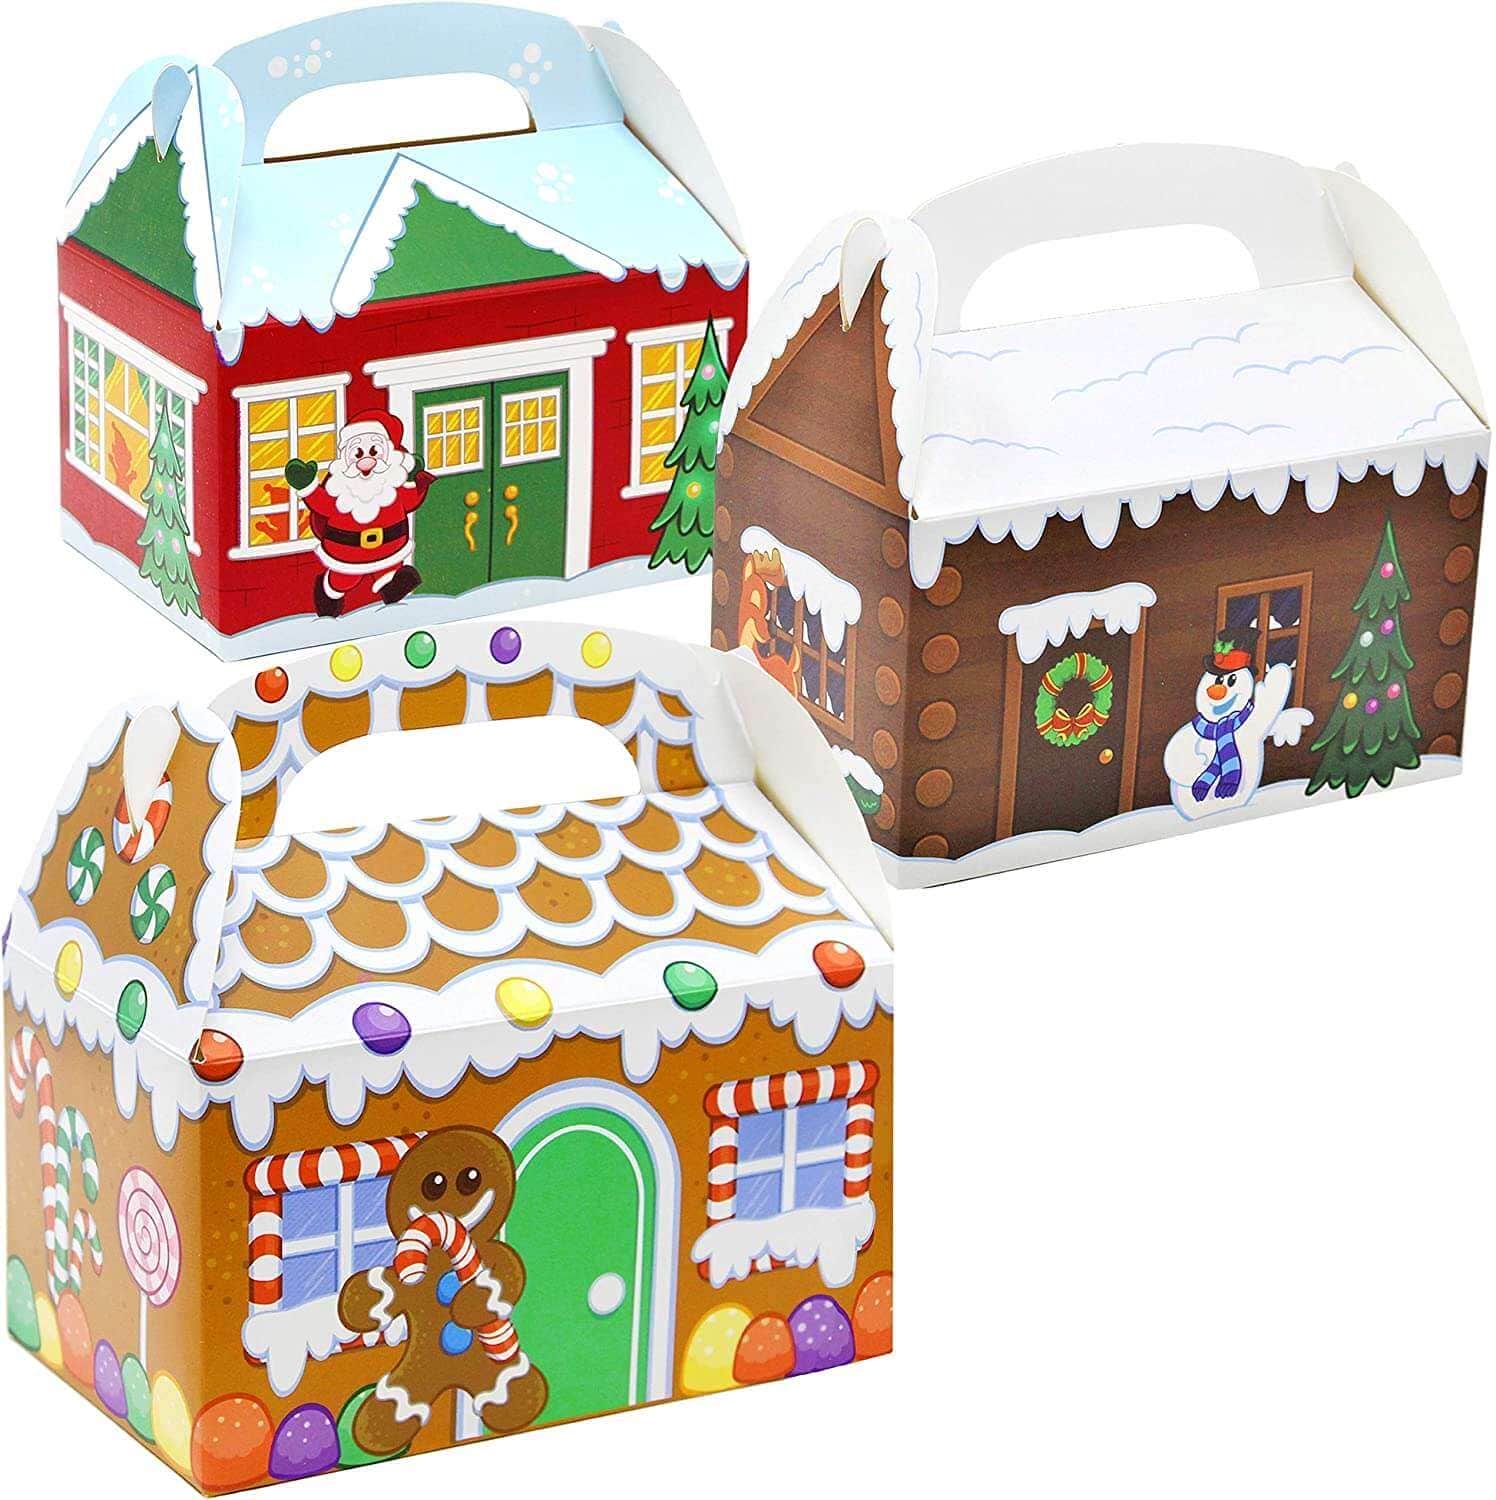 24 Pieces 3D Christmas House Cardboard Treat Boxes for Holiday Xmas Goody Gift, Goodie Paper Boxes, School Classroom Party Favor Supplies, Candy Treat Cardboard Cookie Boxes